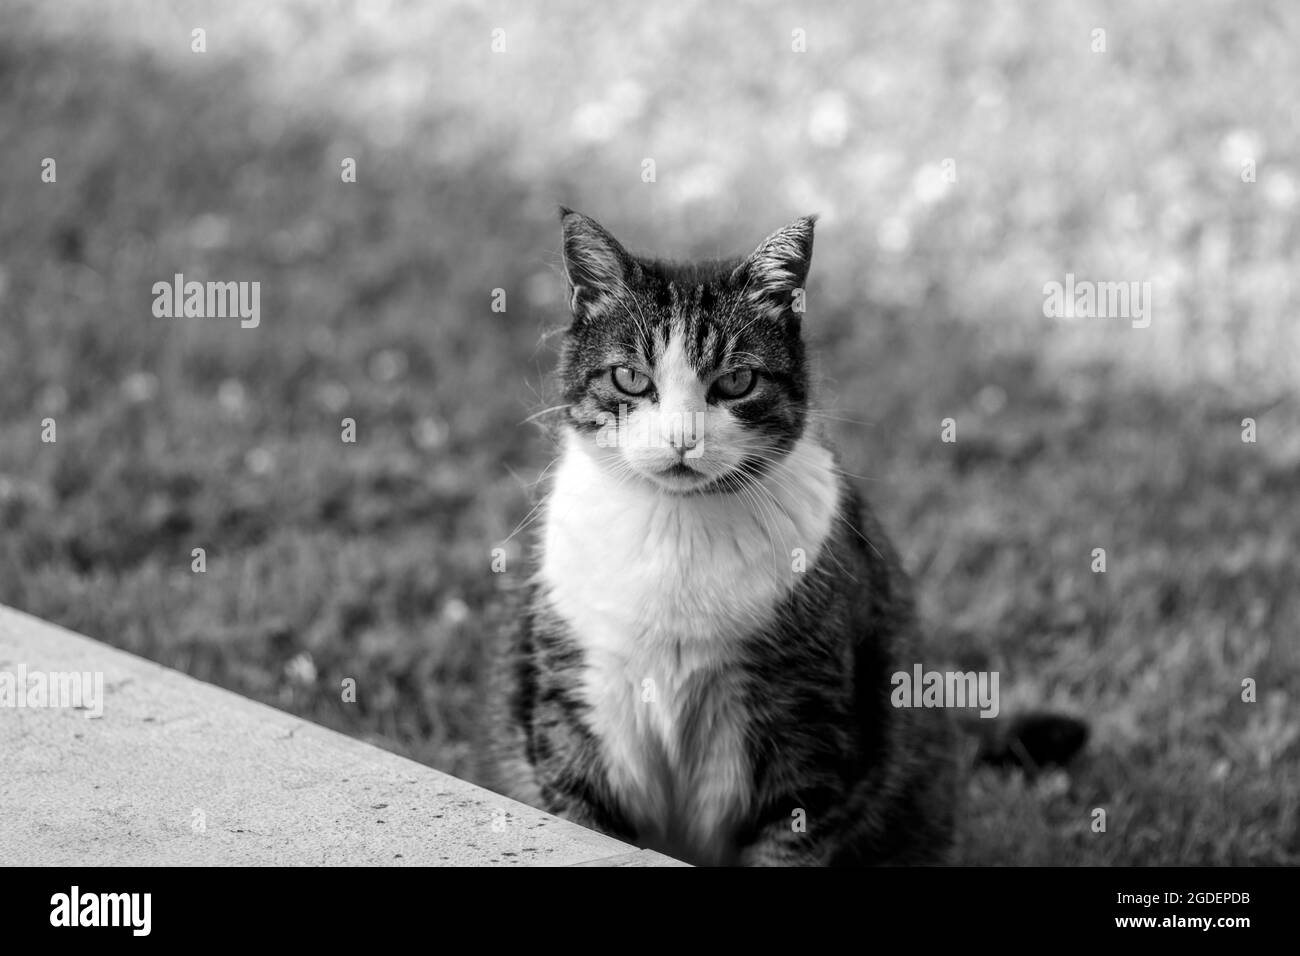 A black and white cat Stock Photo